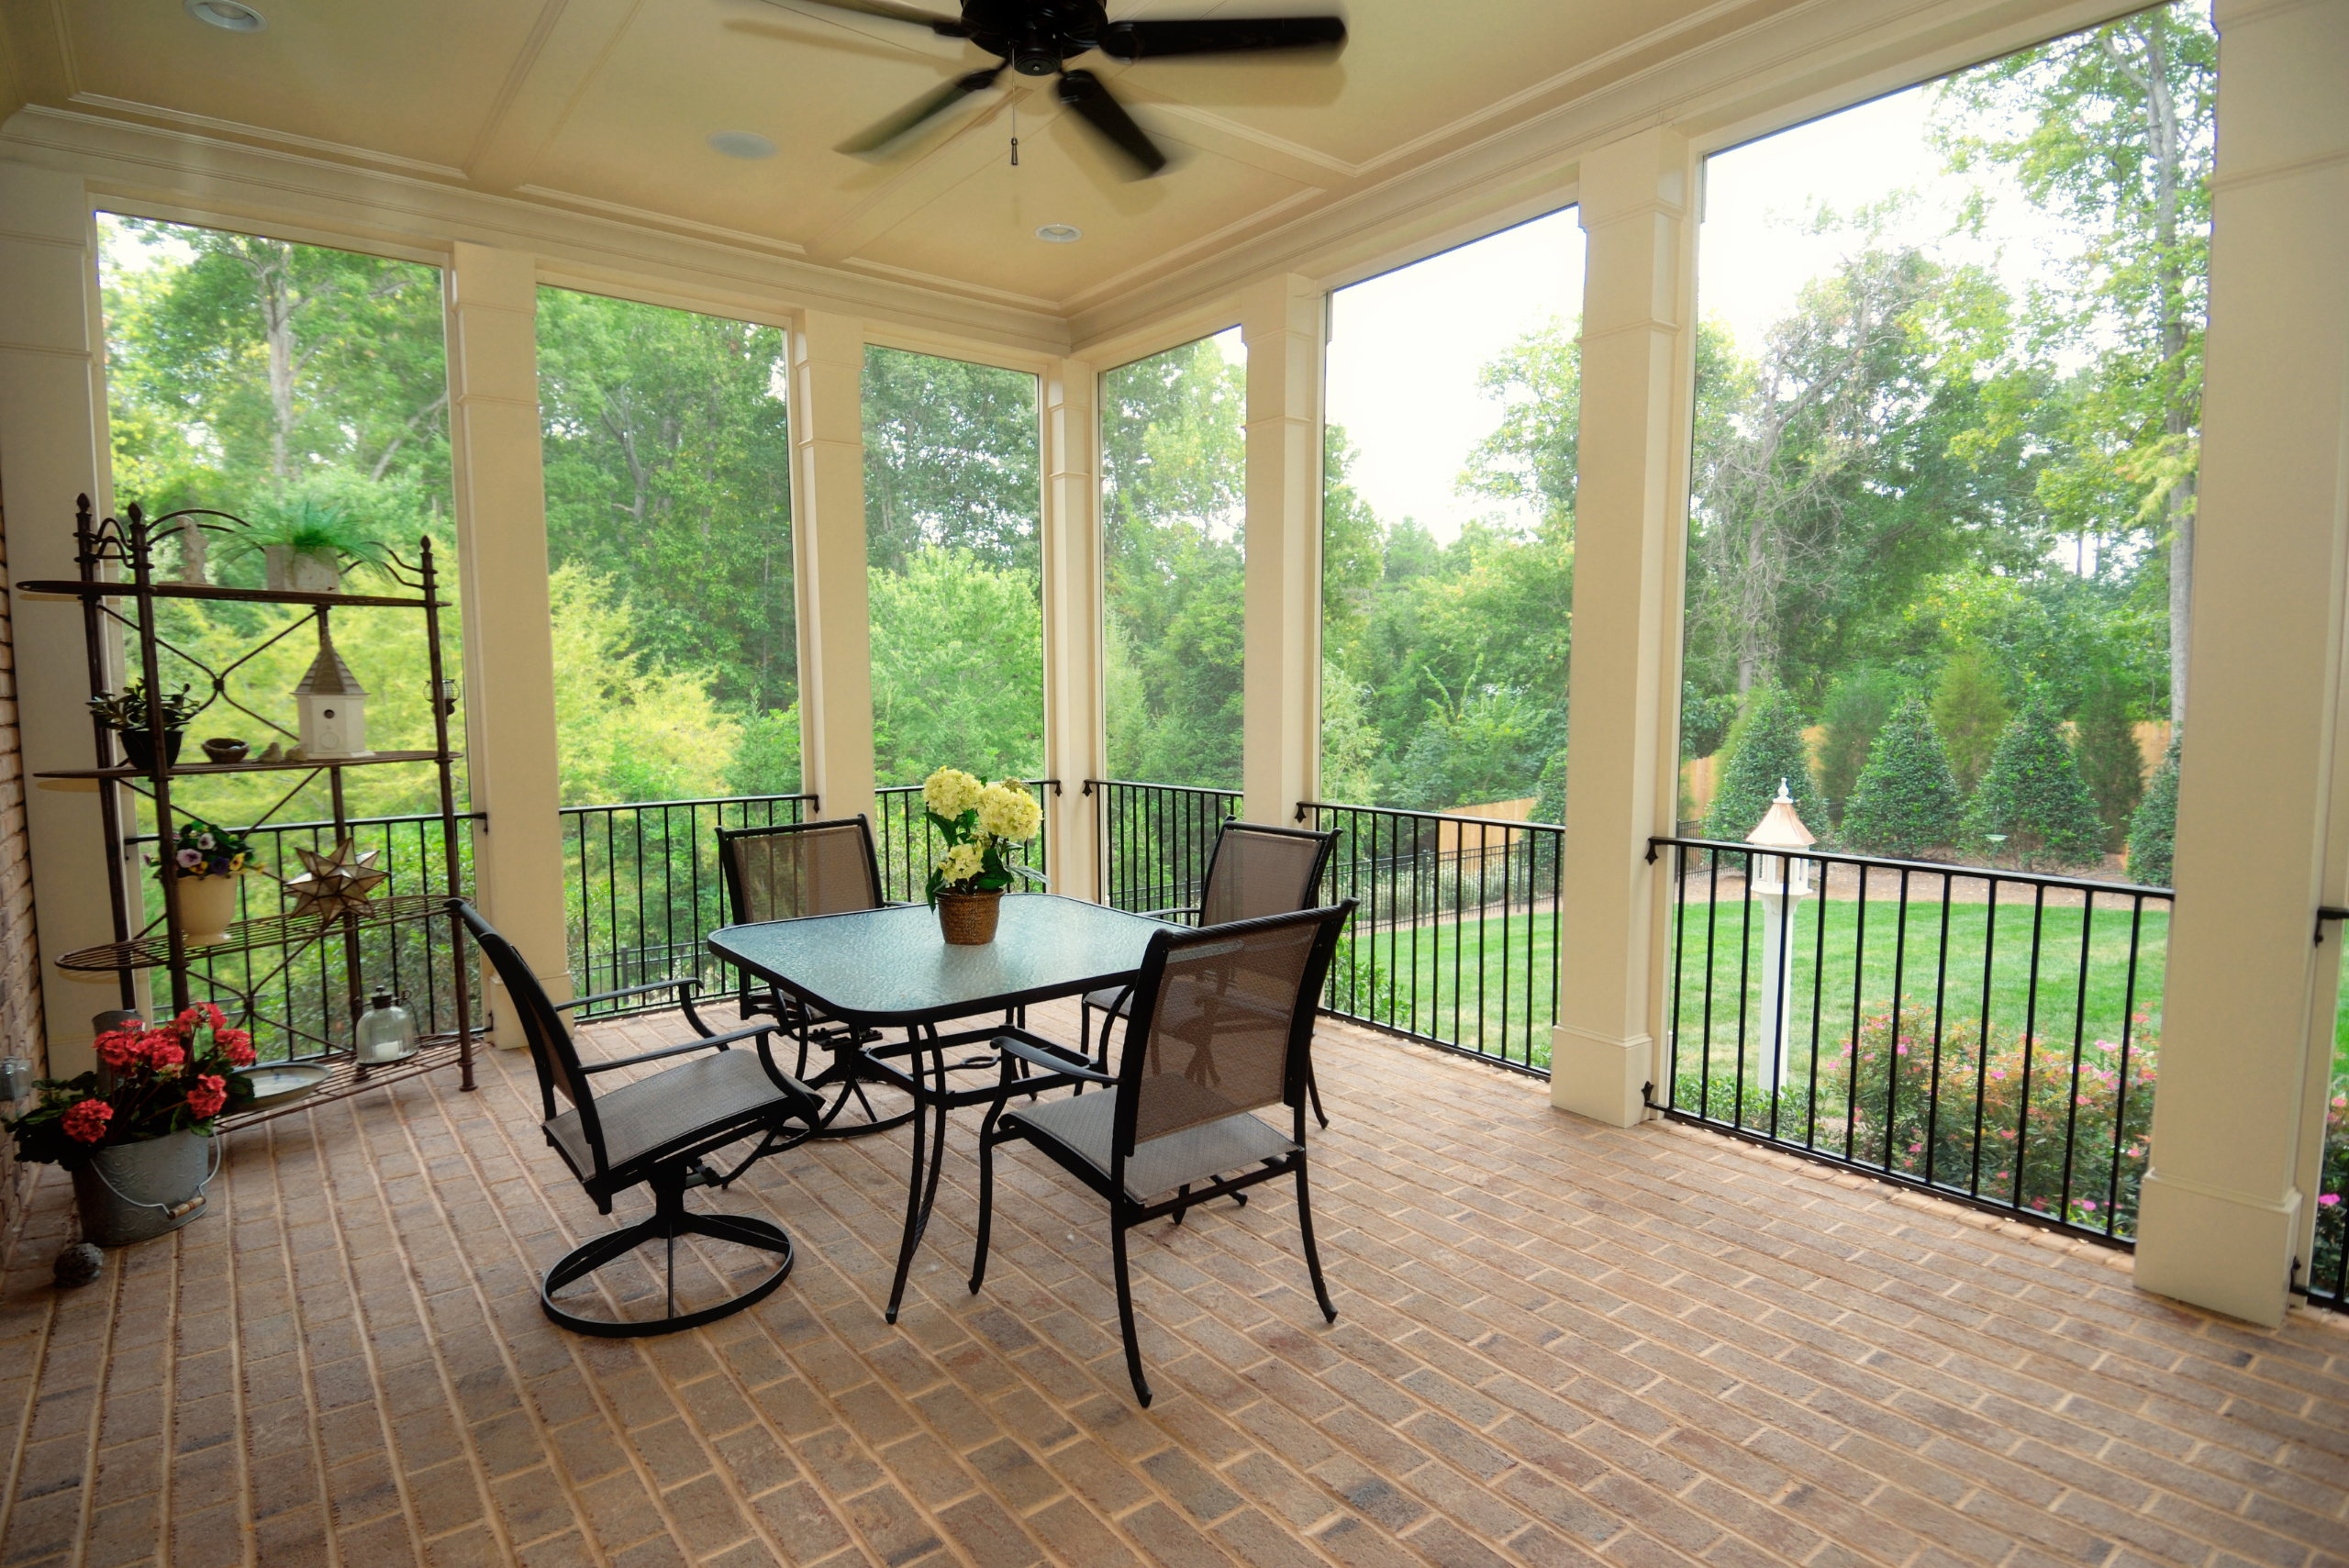 A screened-in porch with black railings.